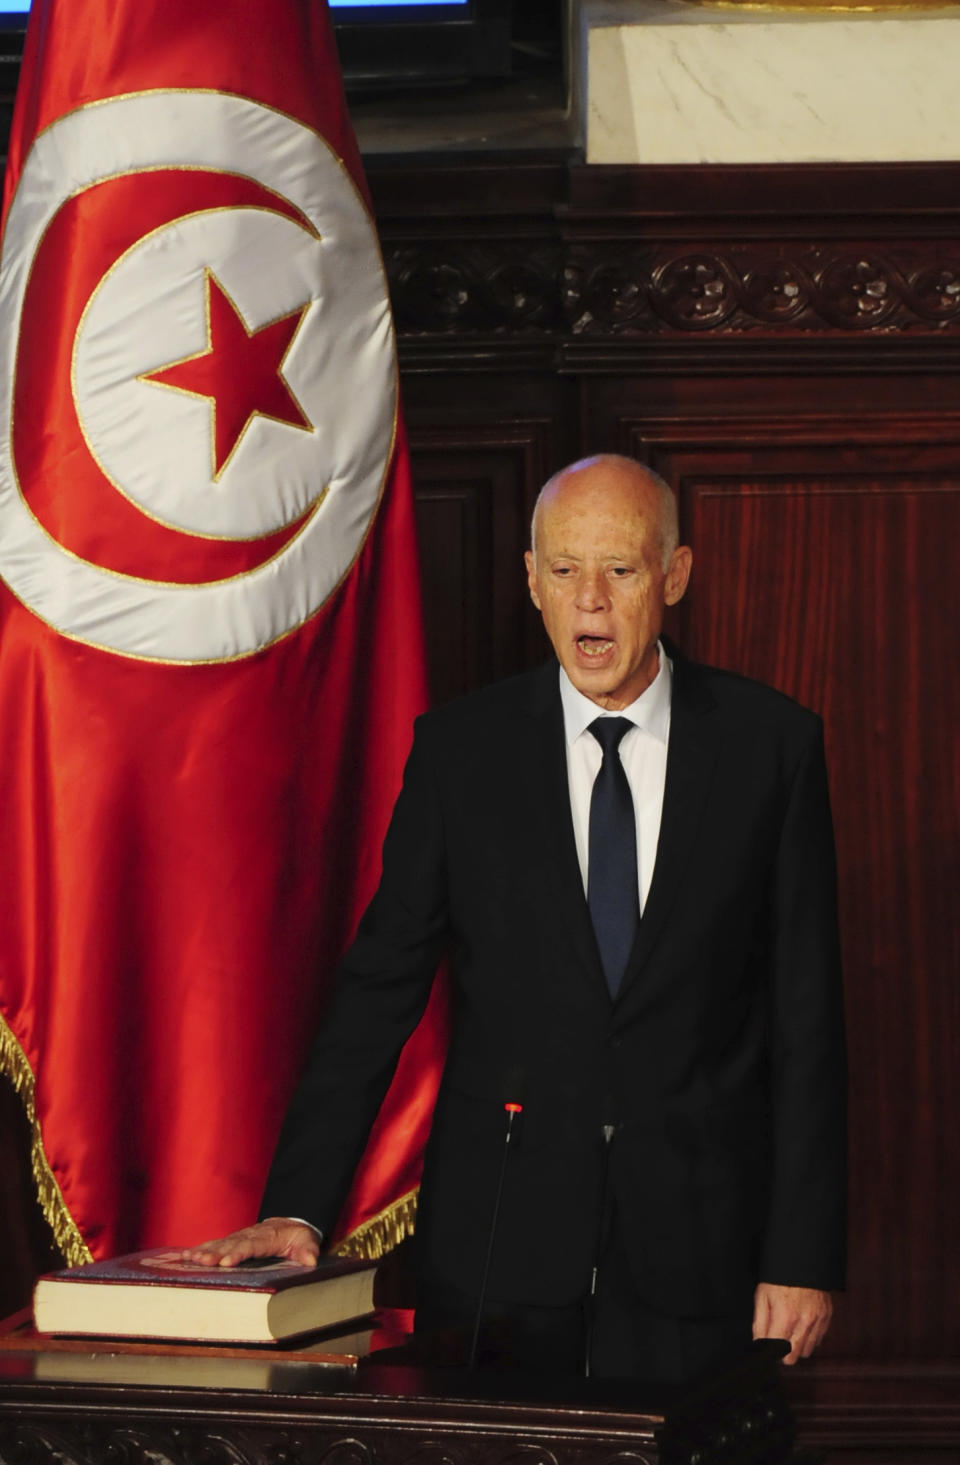 Newly elected Tunisian President Kais Saied puts his hand on the Quran to be sworn in as Tunisian President, in Tunis, Wednesday Oct.23, 2019. Tunisians elected former law professor Kais Saied as president earlier this month to replace President Beji Caid Essebsi, who died in July. (AP Photo/Hassene Dridi)